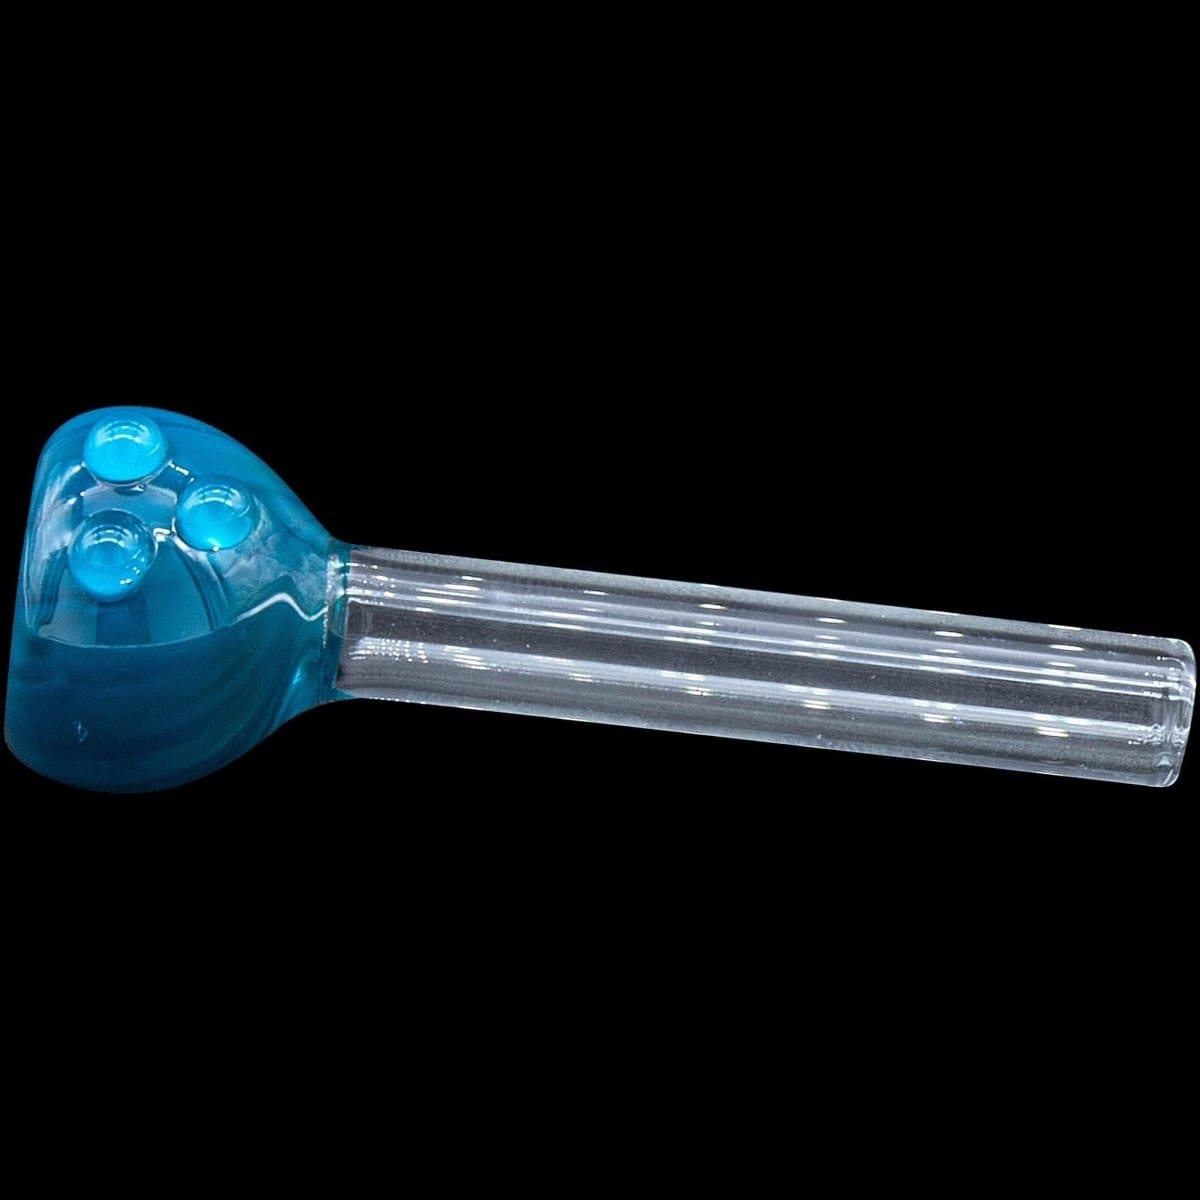 LA Pipes Smoking Accessory Candy Colored 9mm Pull-Stem Slide